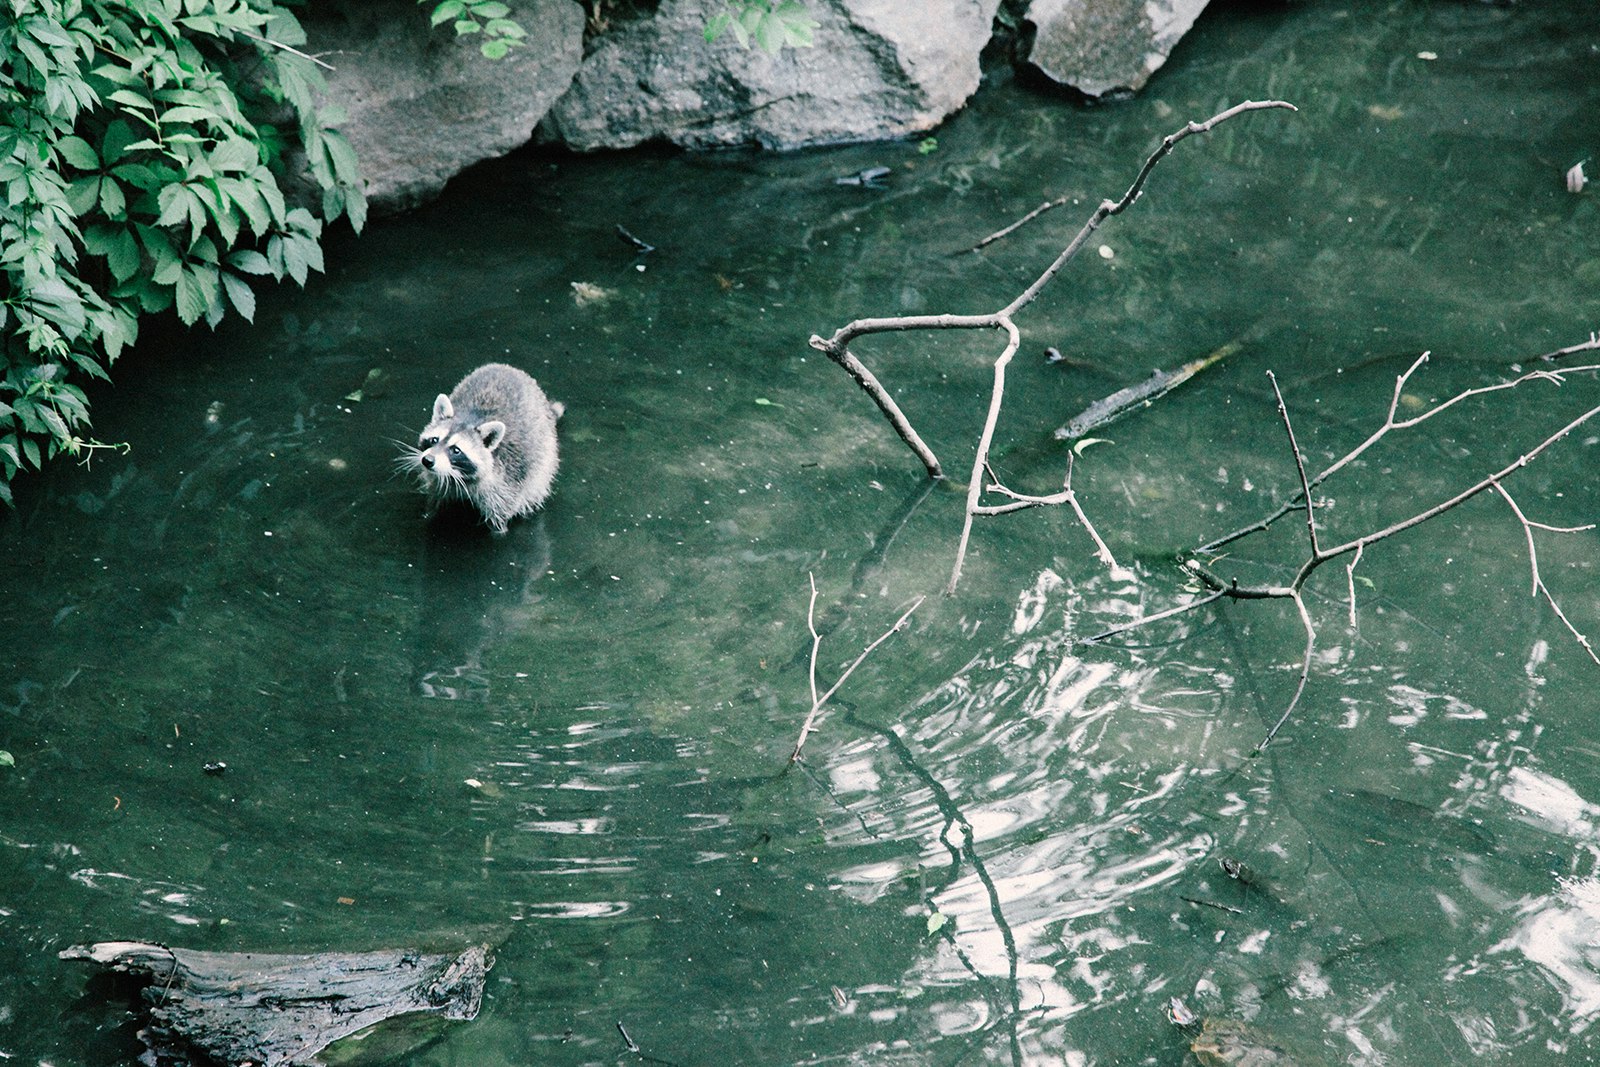 A small racoon looks up at the camera from a pond of water in Central Park © Mikki Brammer